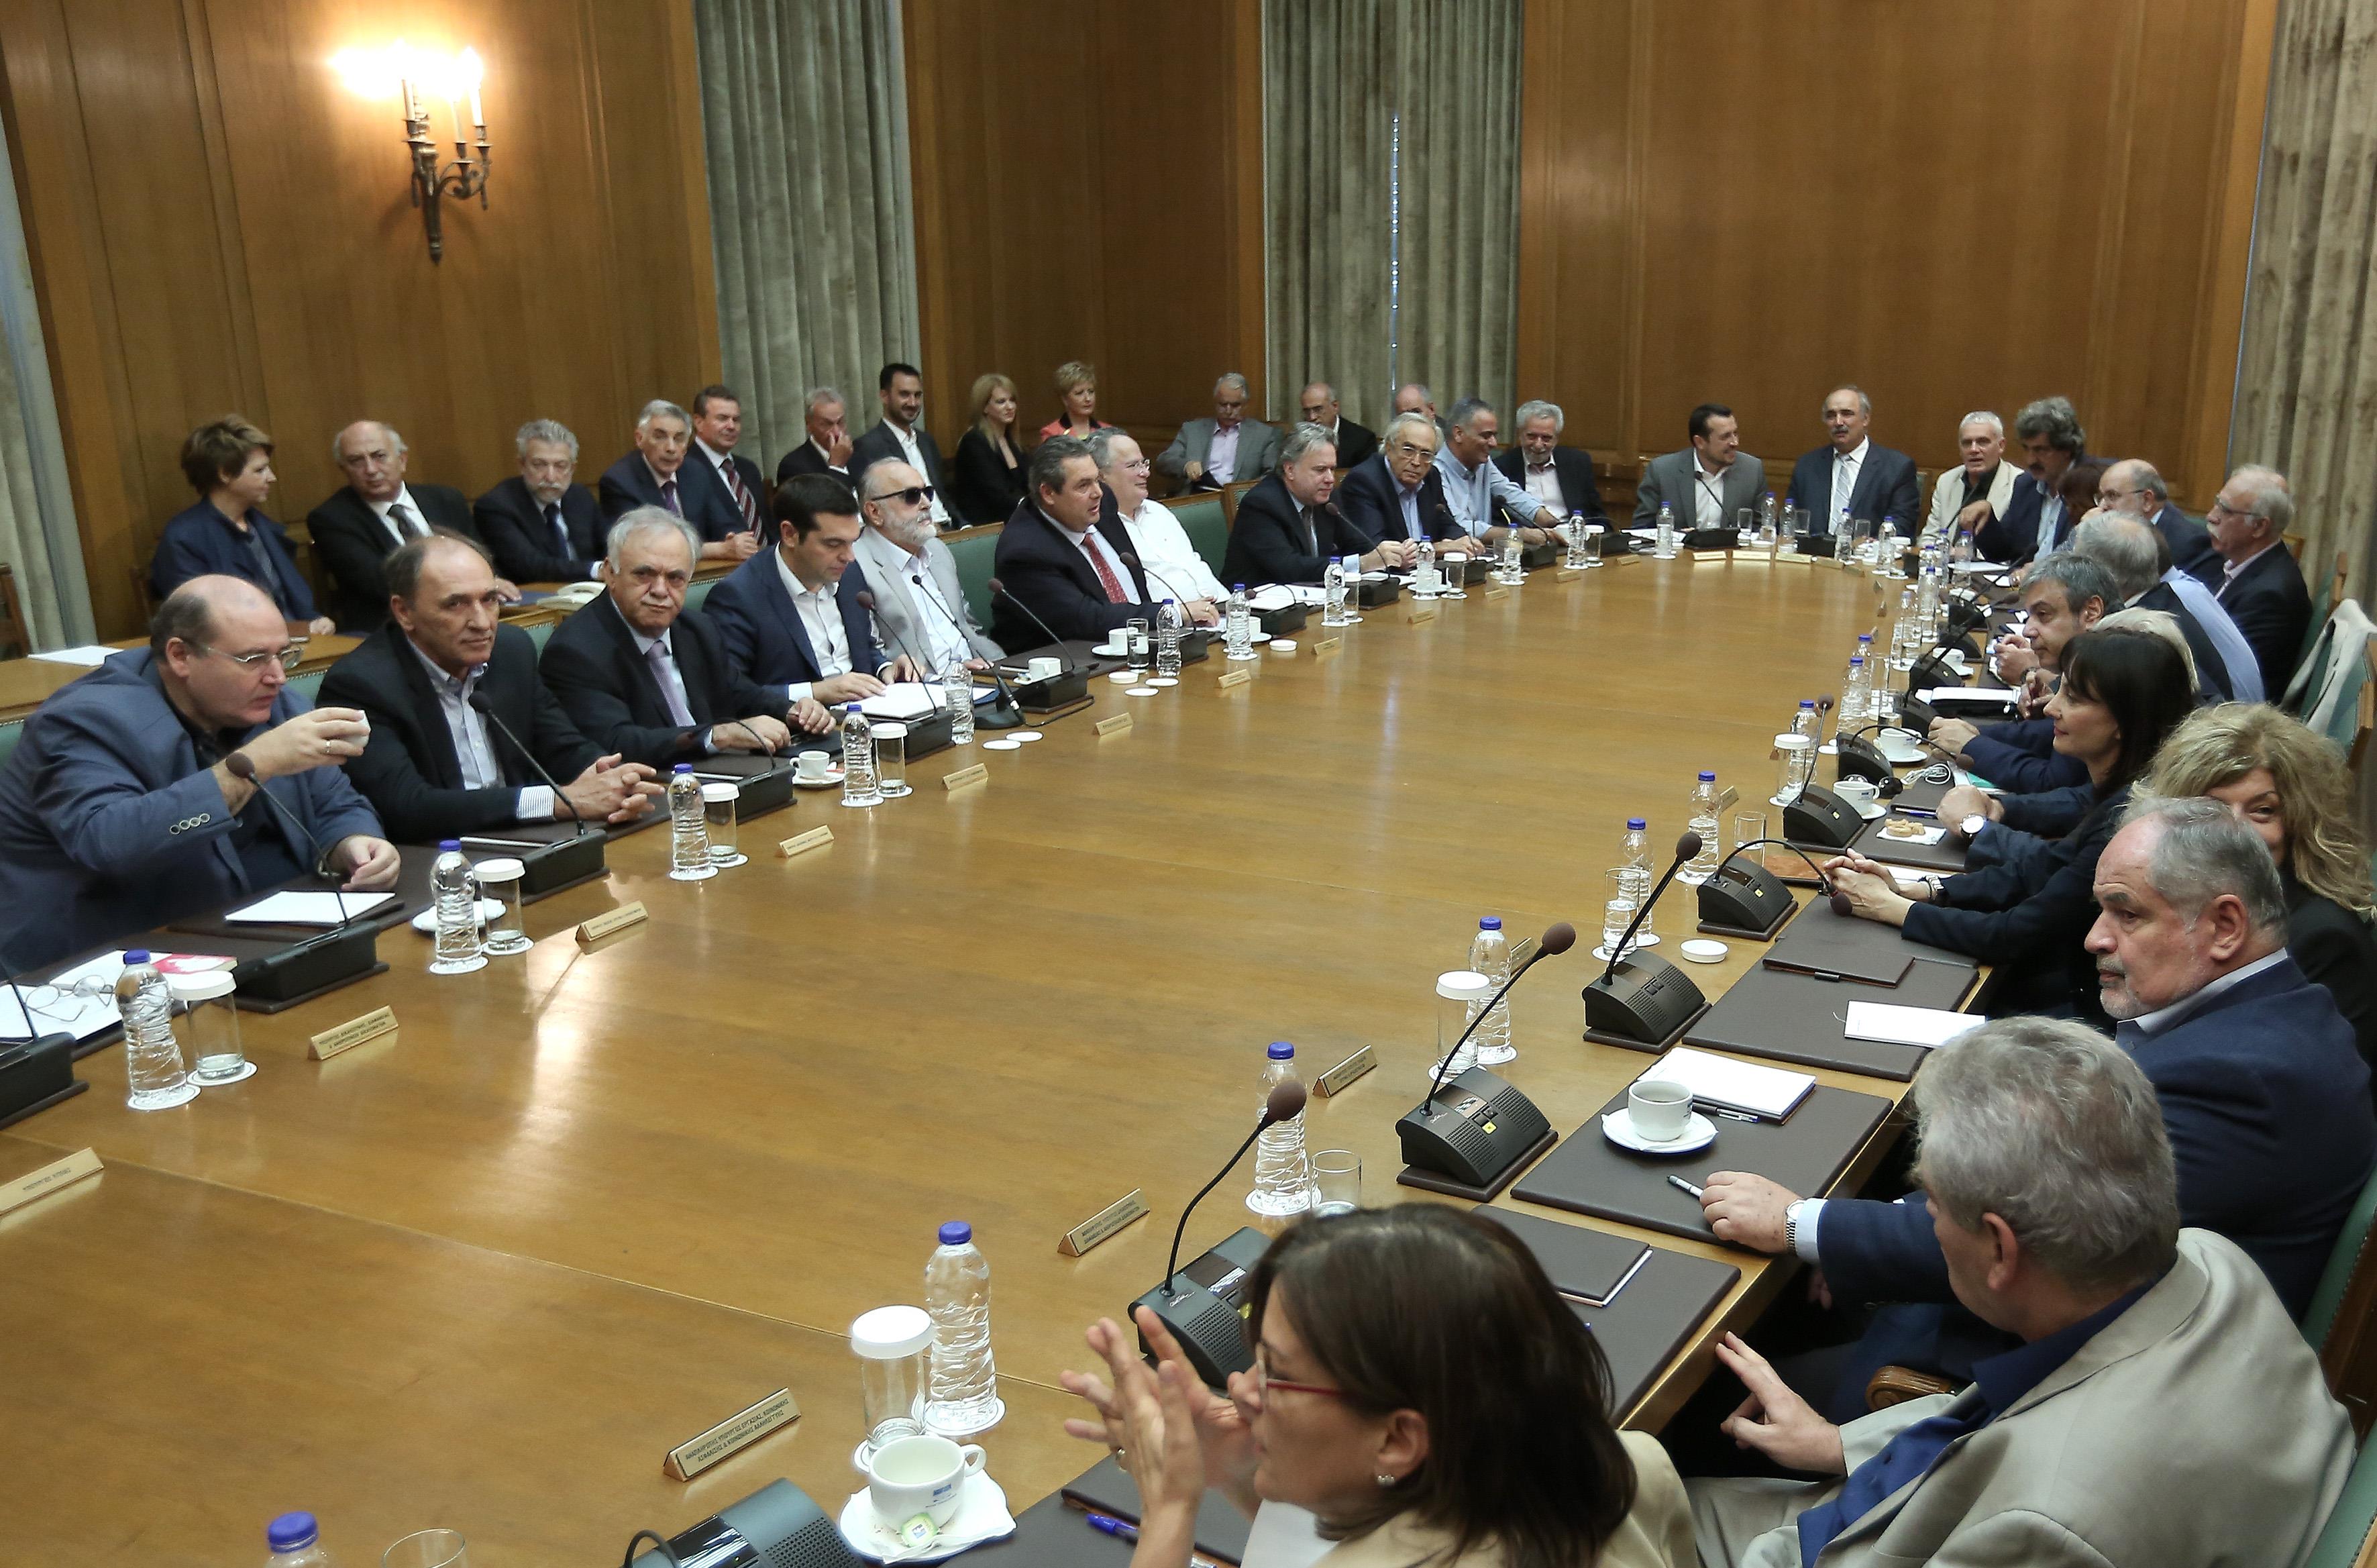 PM Tsipras calls for greater reforms at Ministerial Council